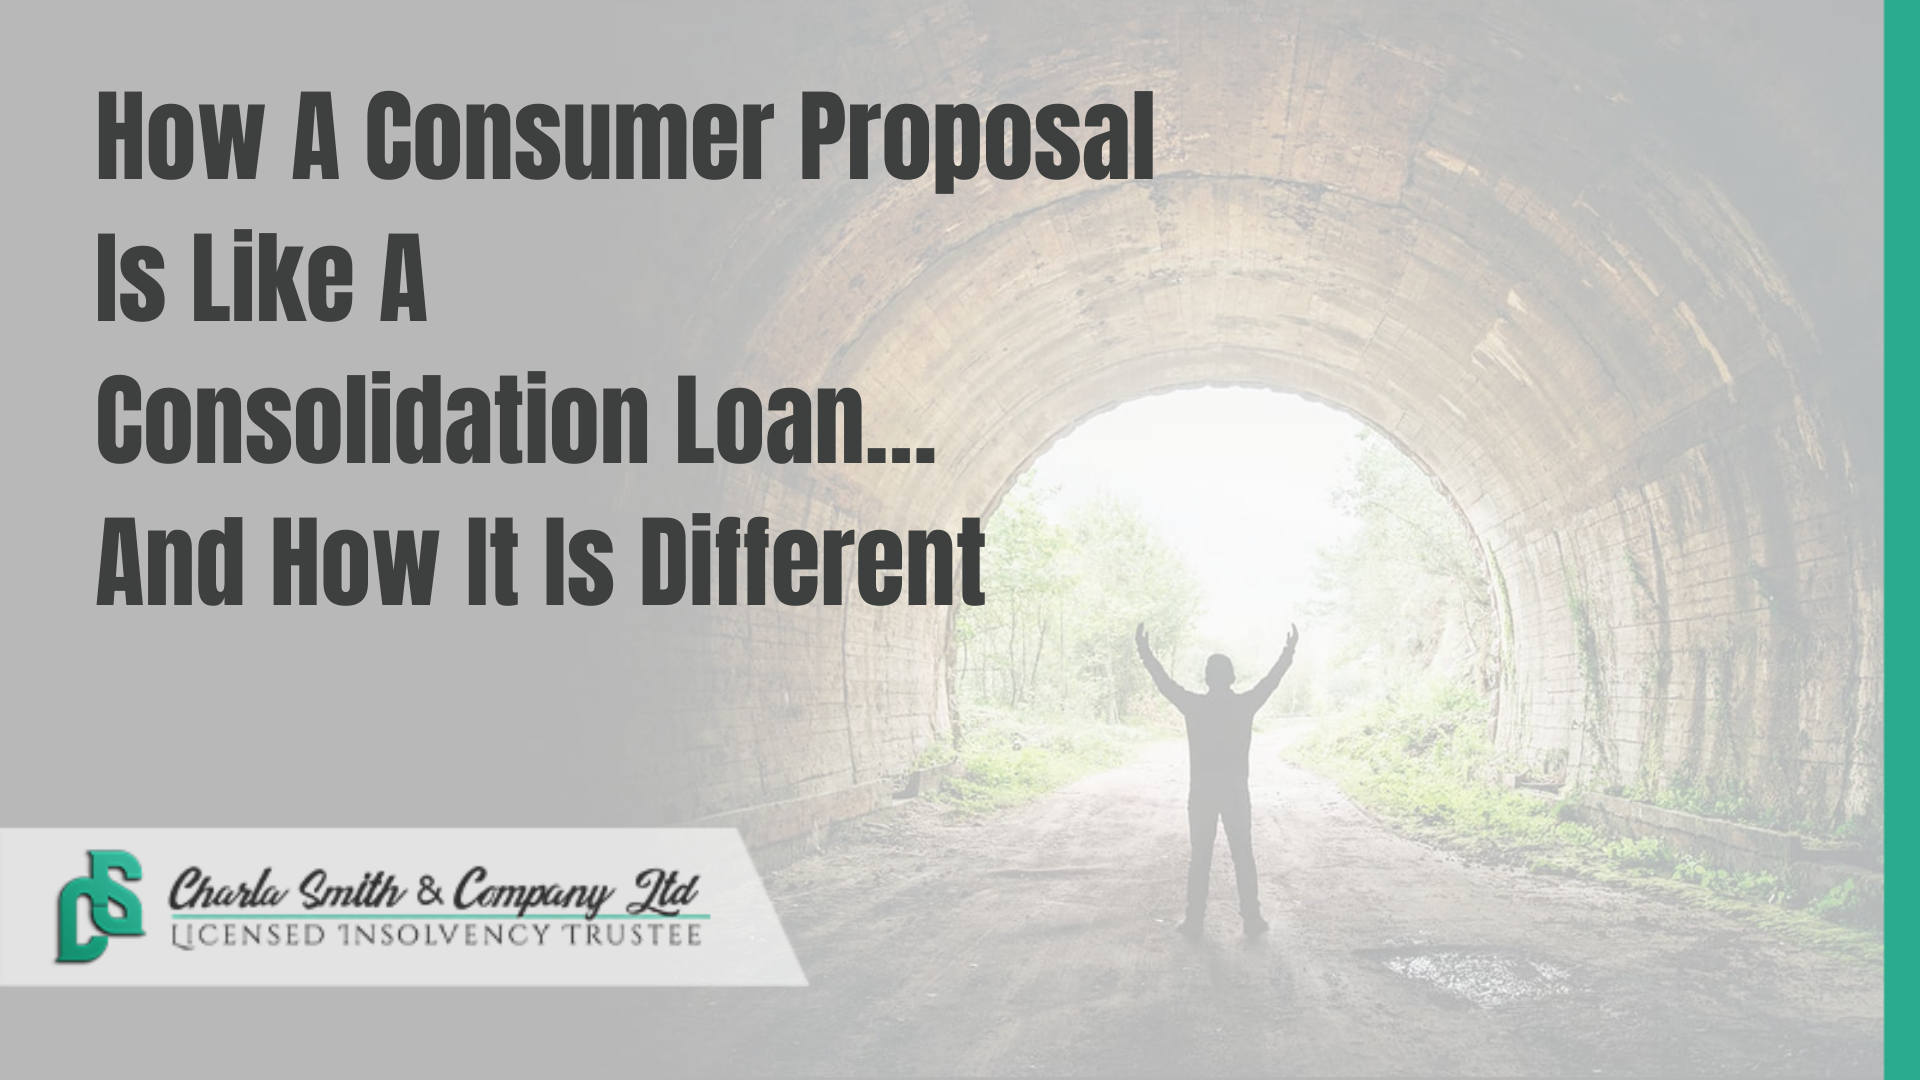 How A Consumer Proposal Is Like A Consolidation Loan… And How It Is Different